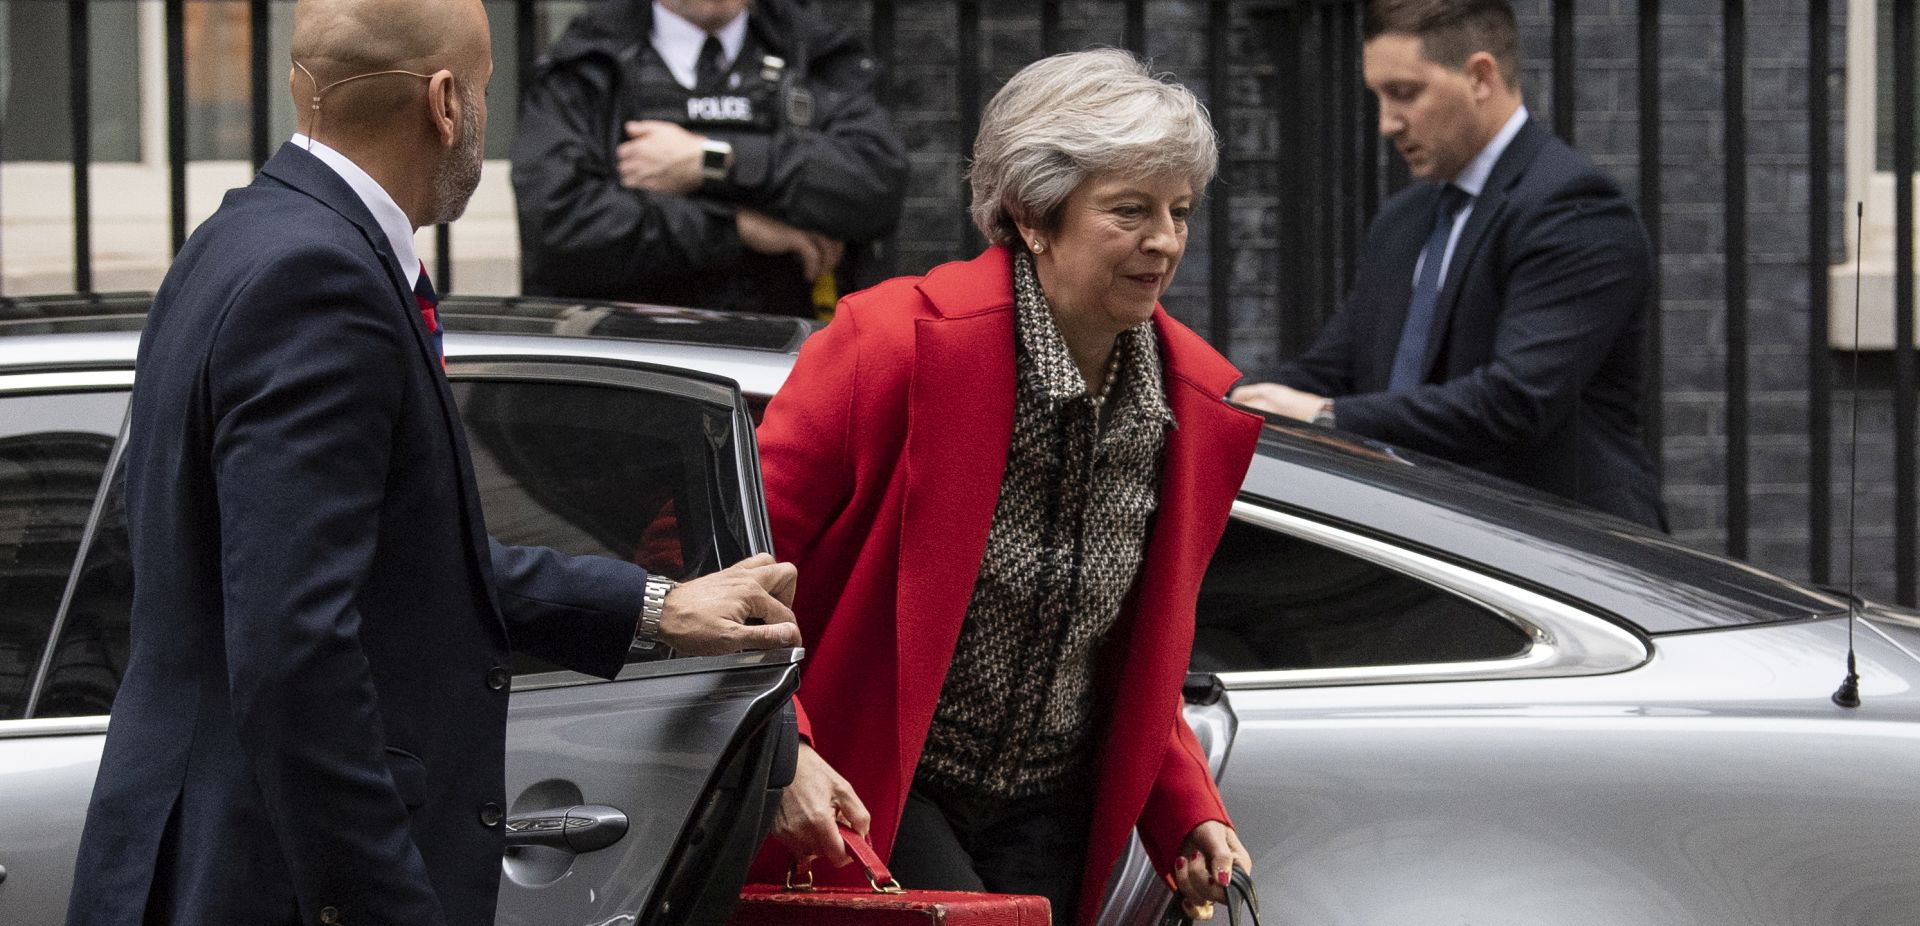 epa07169619 British Prime Minister Theresa May arrives in Downing Street, 16 November 2018. Prime Minister May is facing pressure in Parliament after six ministers had resigned over her Brexit withdrawal deal.  EPA/WILL OLIVER